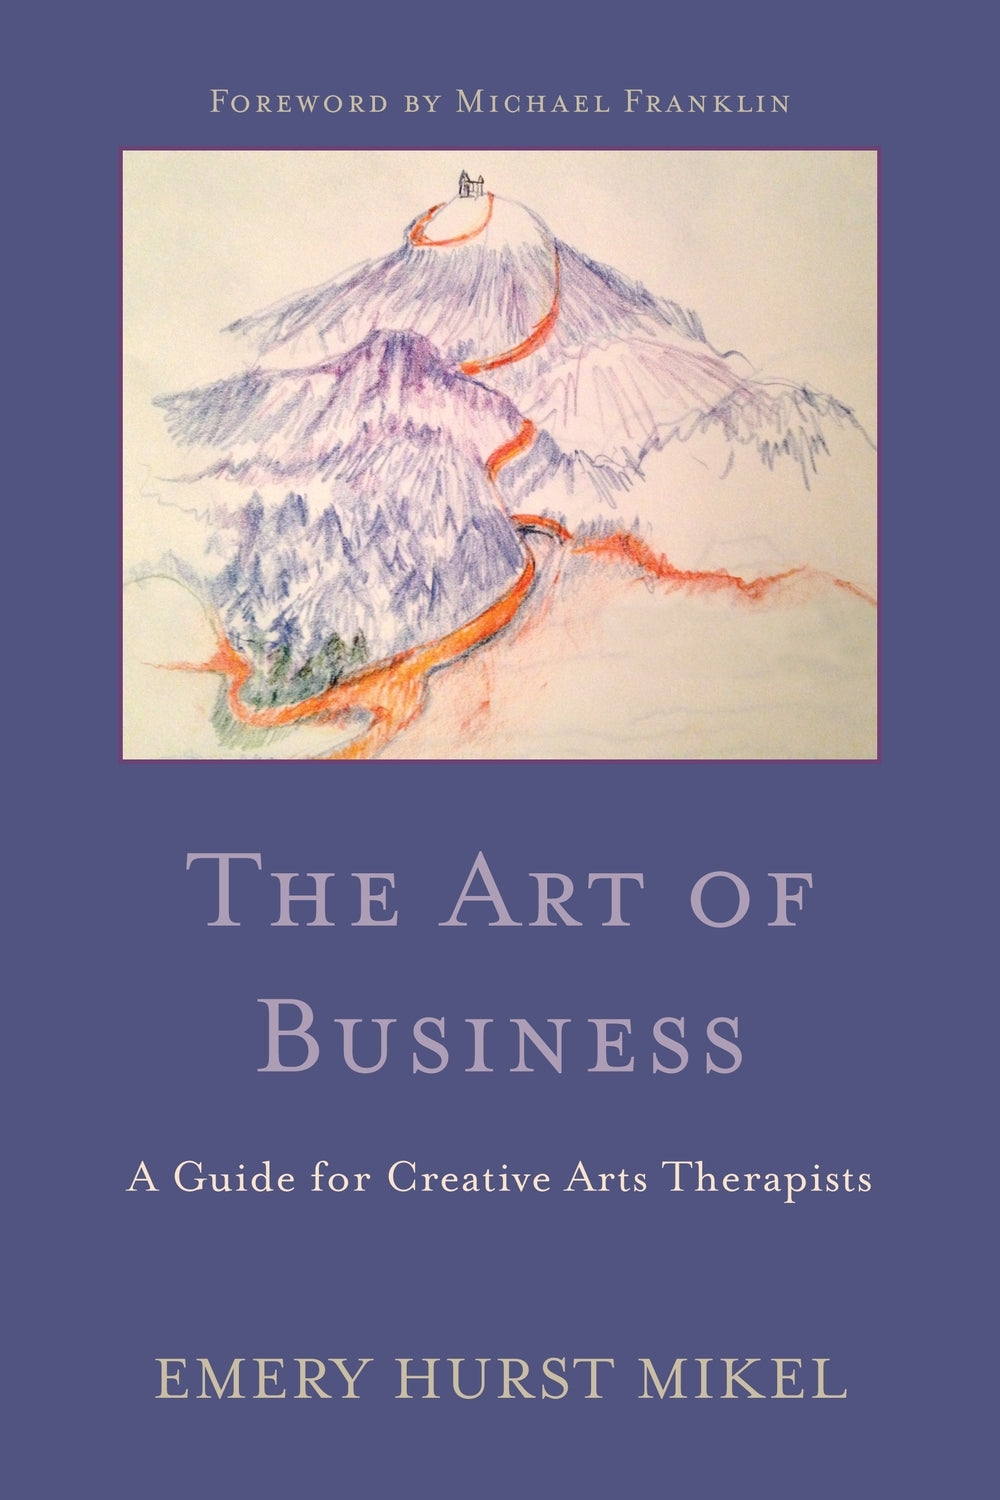 The Art of Business by Michael Franklin, Emery H. Mikel